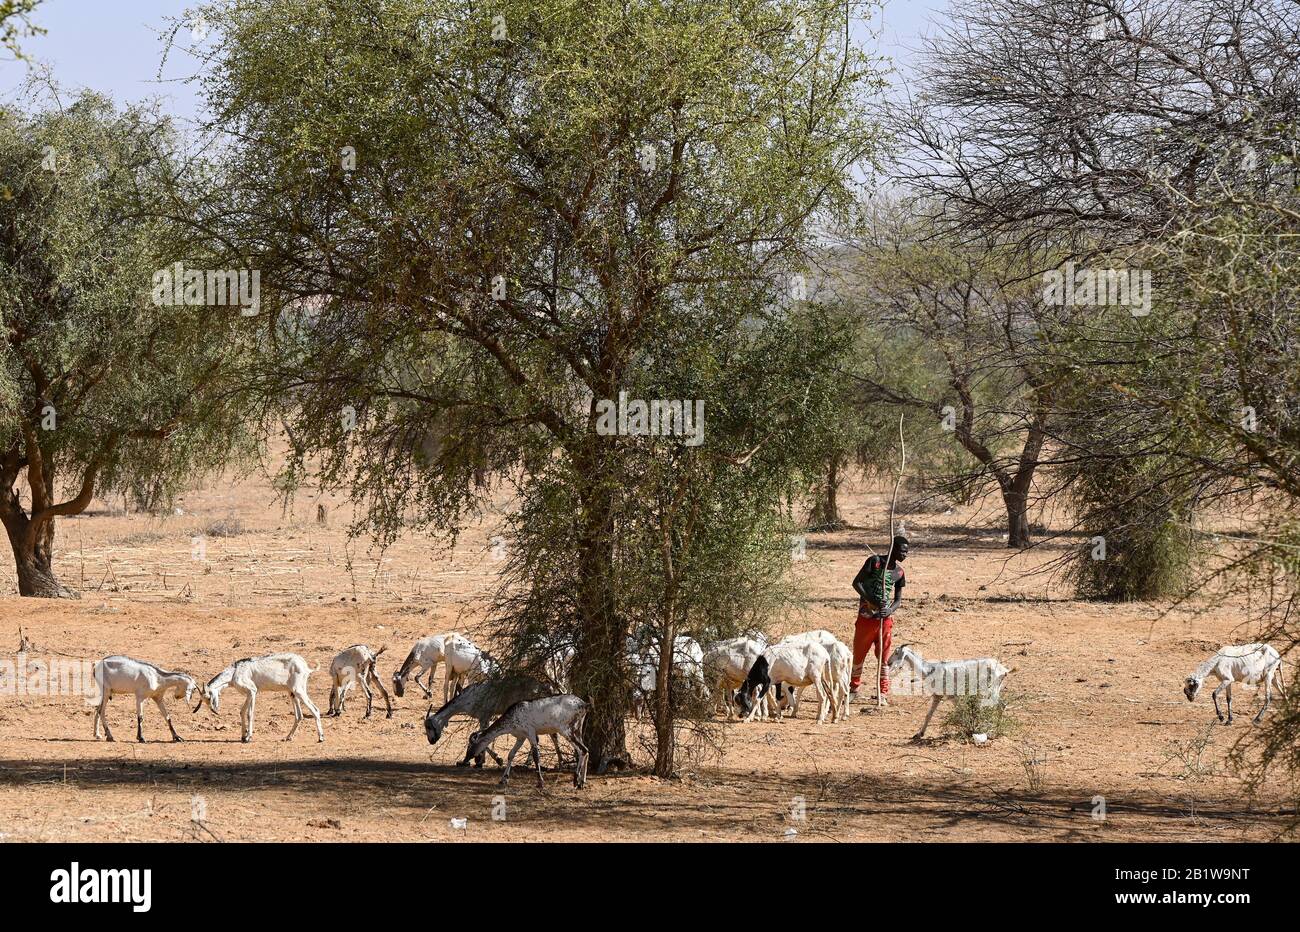 NIGER, village Namaro, tree acacia senegal which is the source of the tree resin gum arabic, shepherd with goats, feeding the cattle with leaves from the trees in dry season Stock Photo